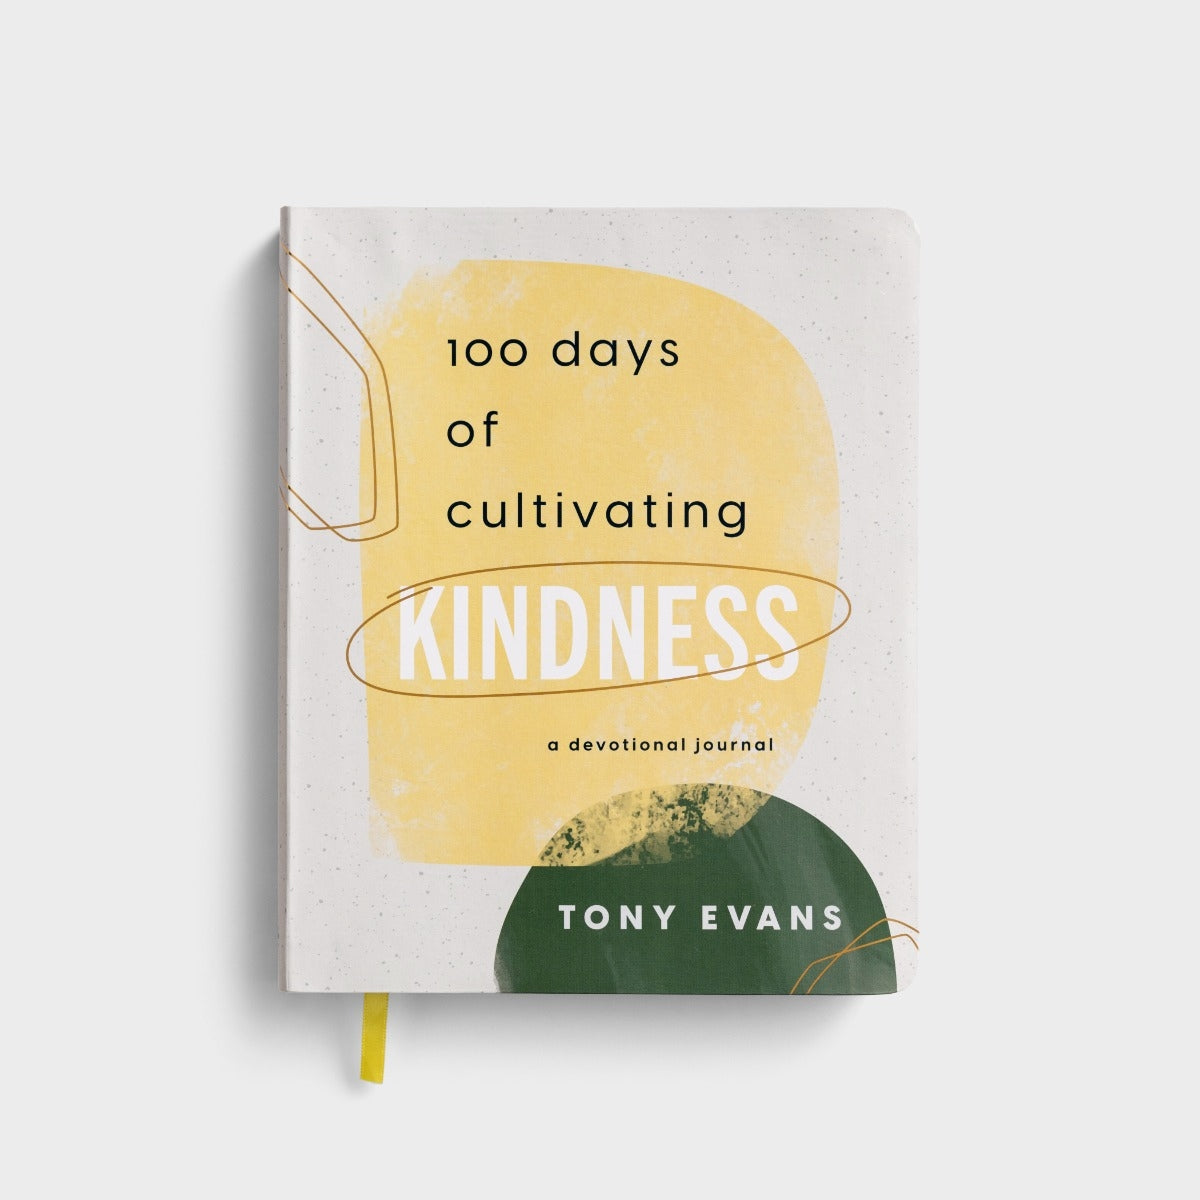 100 Days of Cultivating Kindness - A Devotional Journal